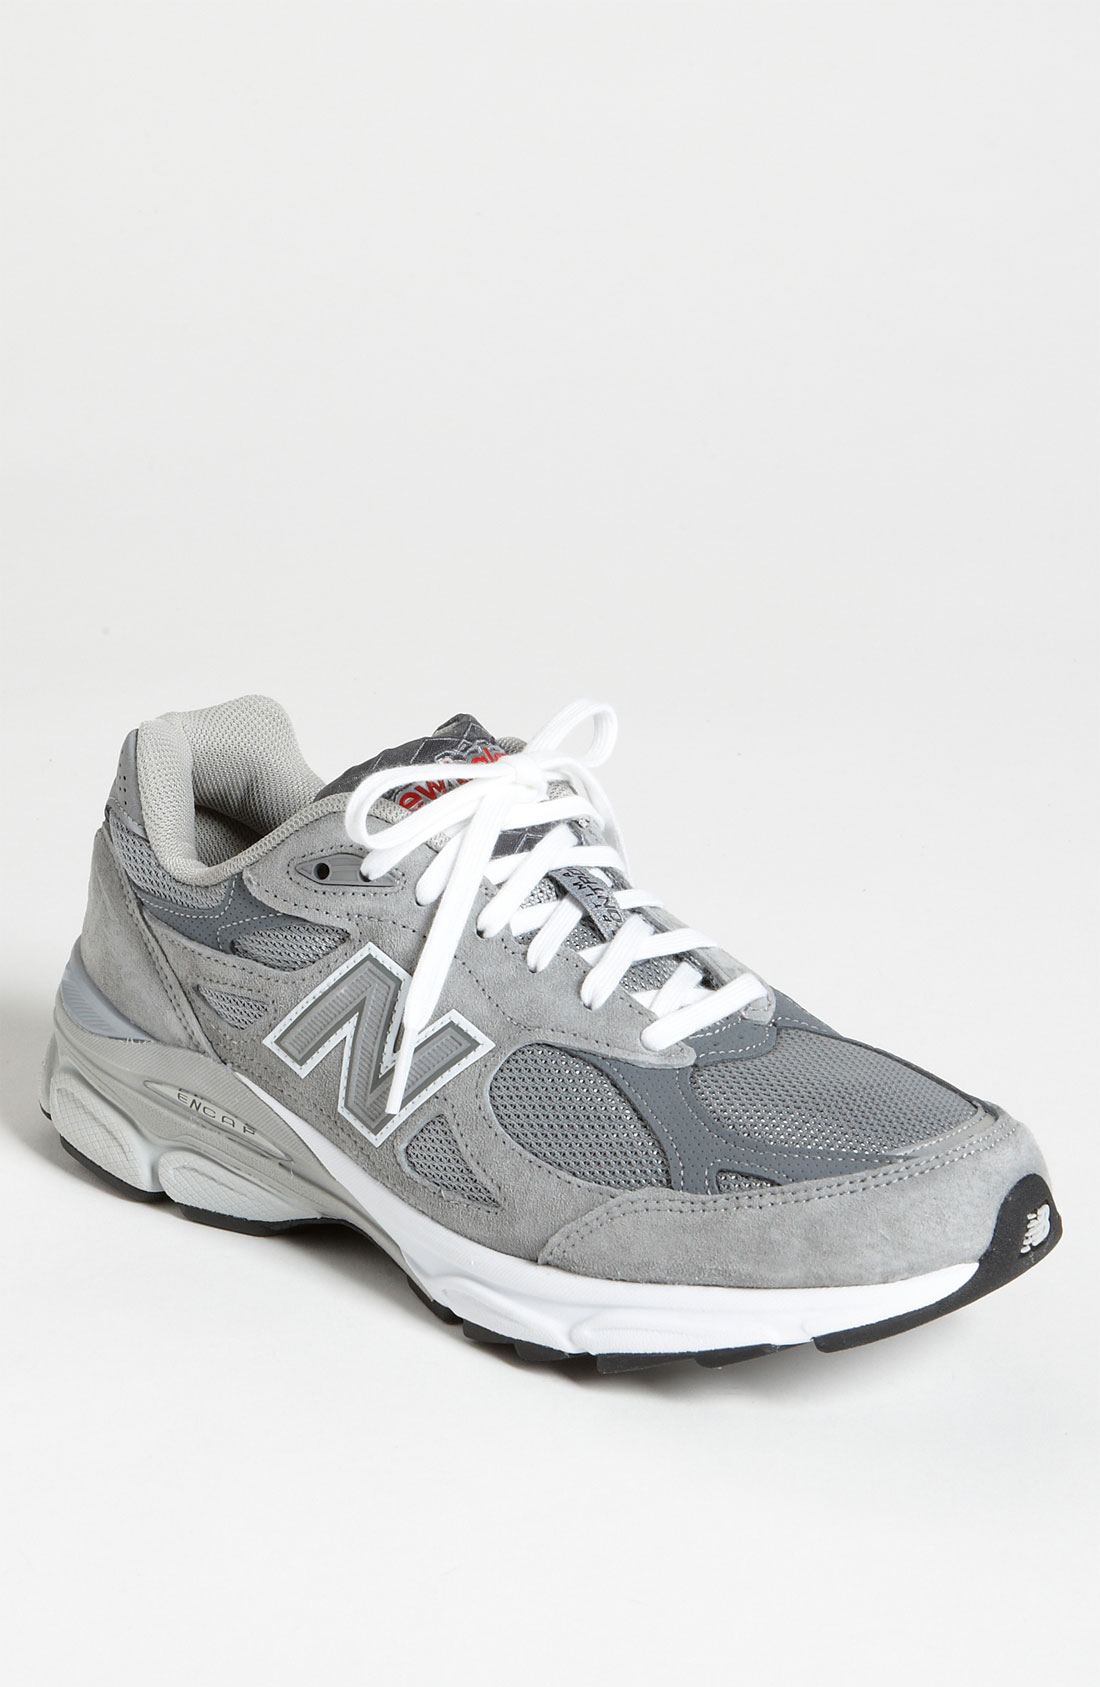 New Balance 599 Mens Outlet Shop, UP TO 70% OFF